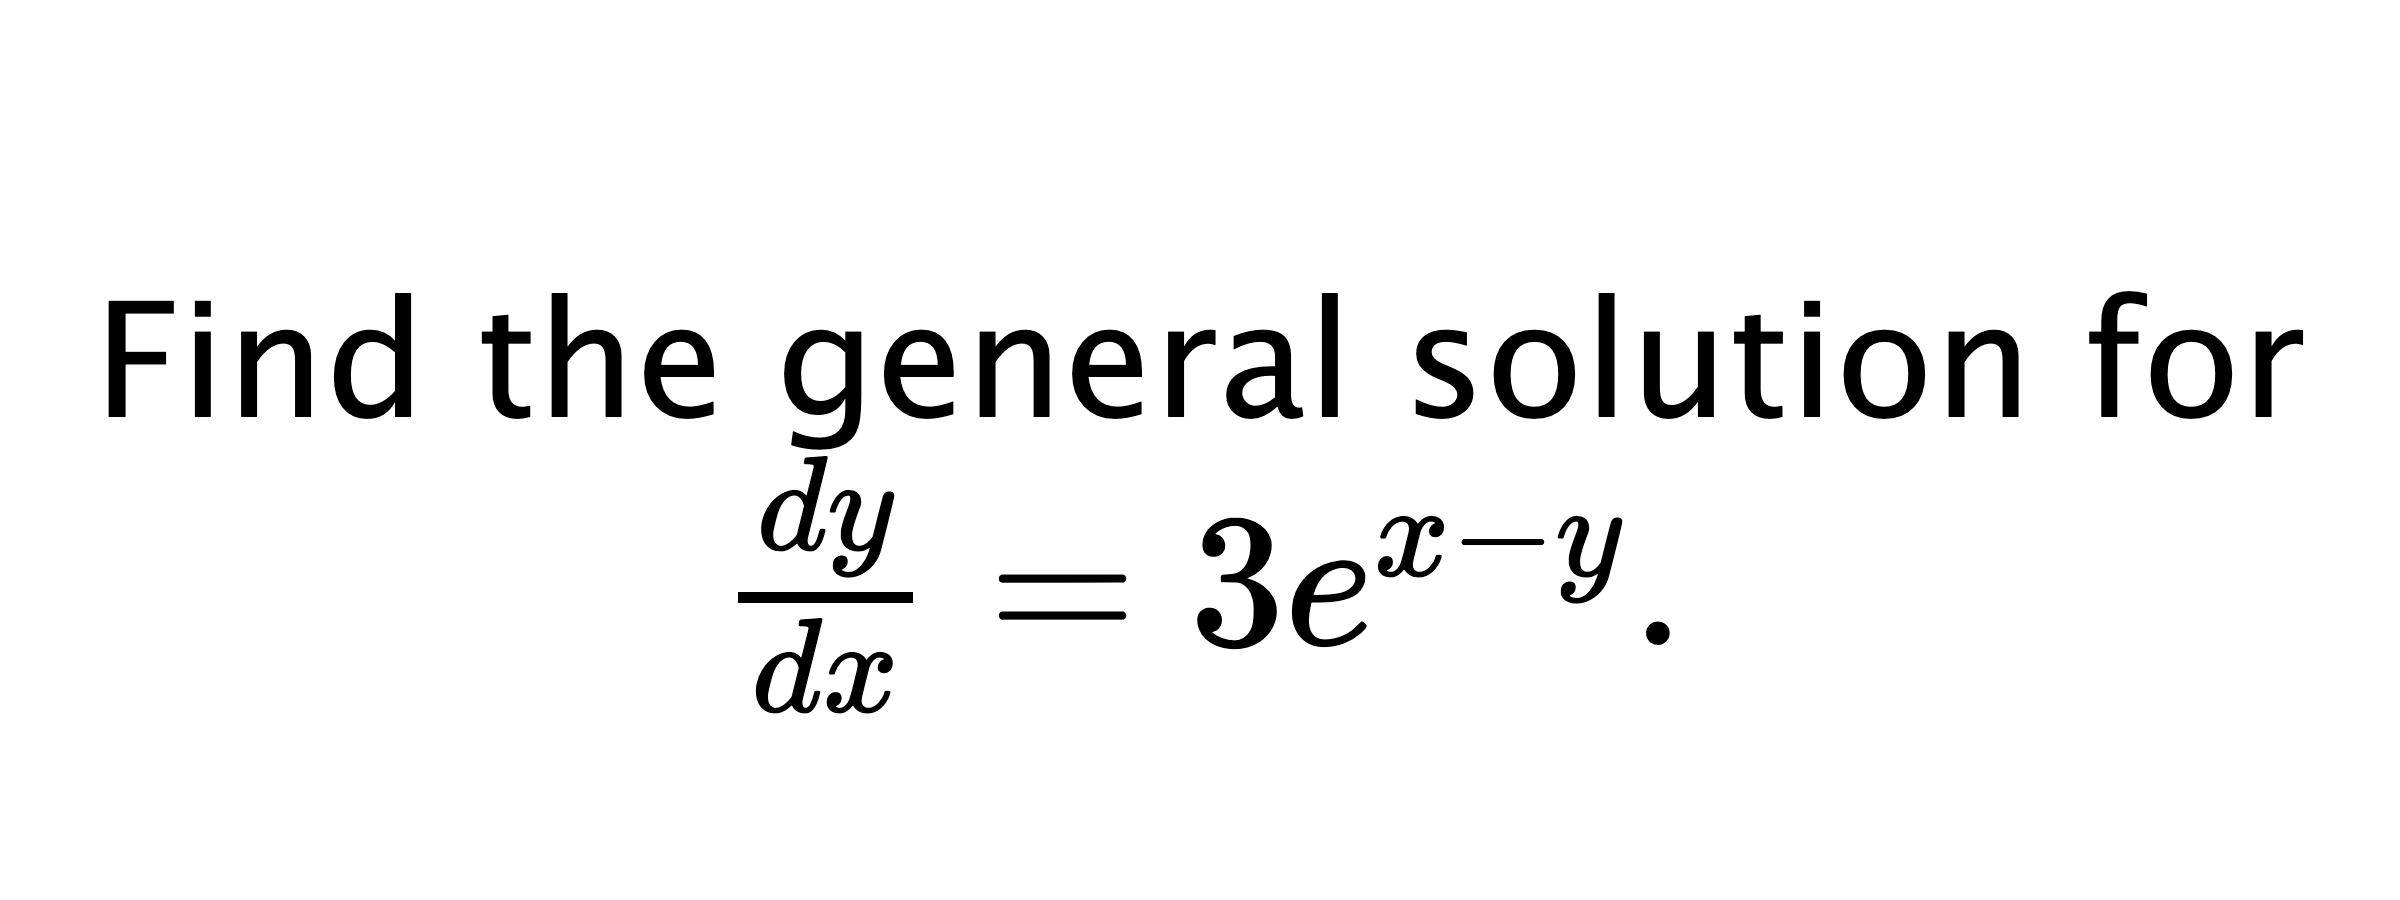  Find the general solution for $ \frac{dy}{dx}=3e^{x-y}. $